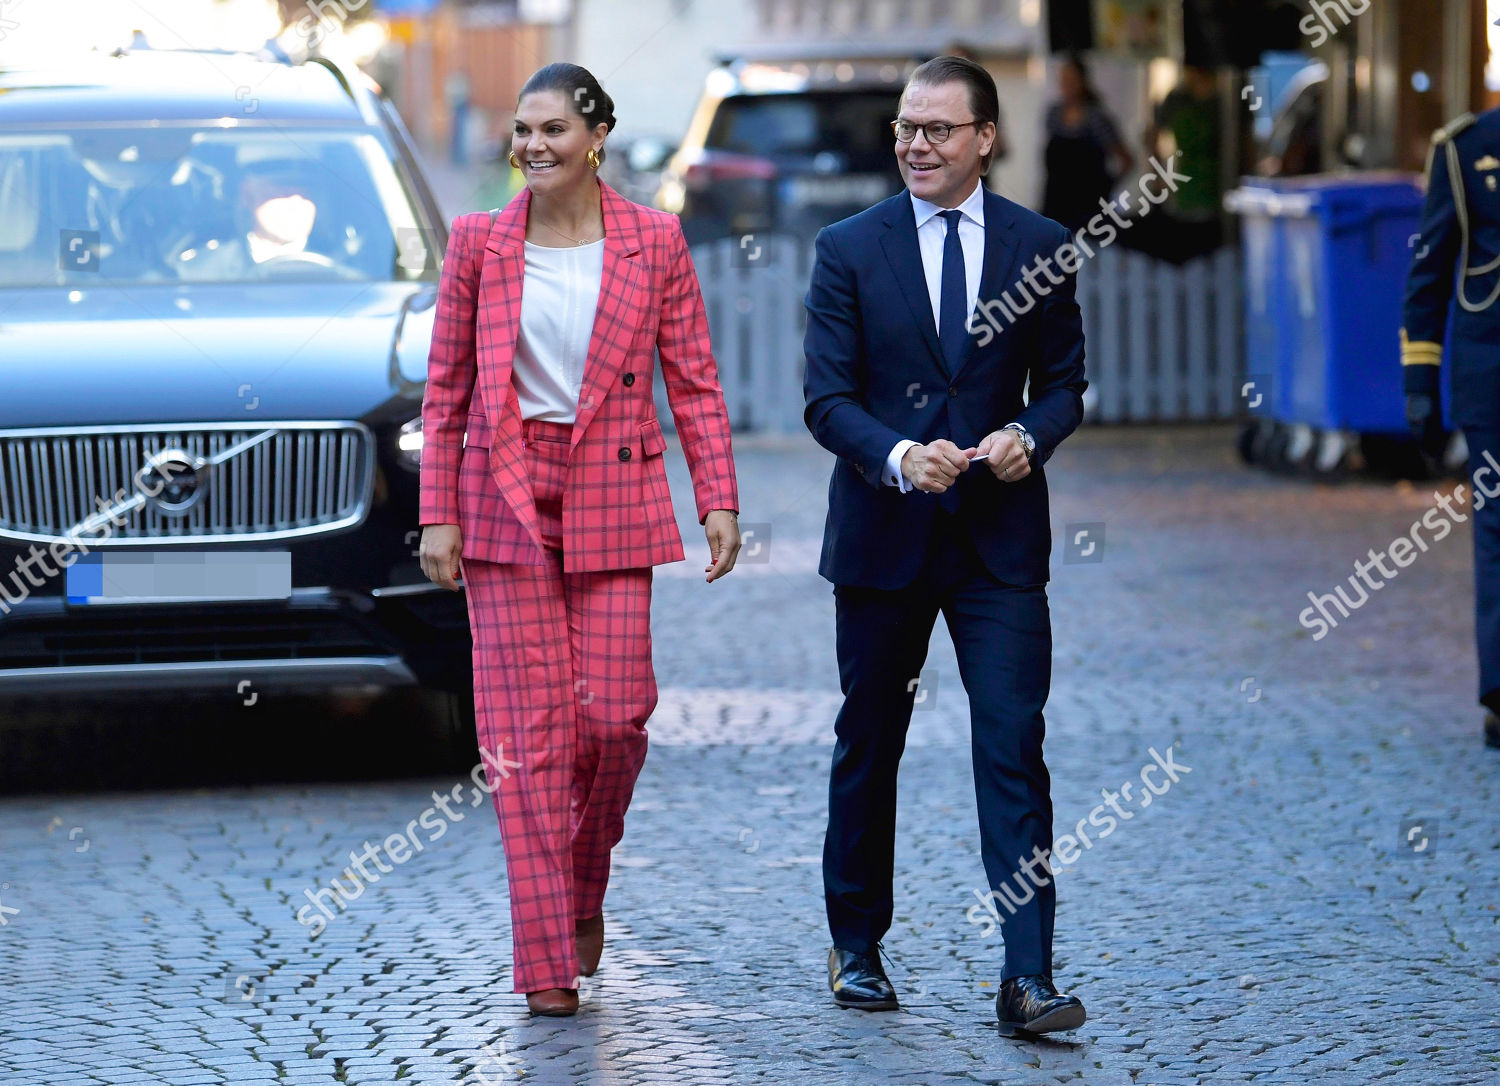 crown-princess-victoria-and-prince-daniel-visit-to-gavle-sweden-shutterstock-editorial-10773227a.jpg